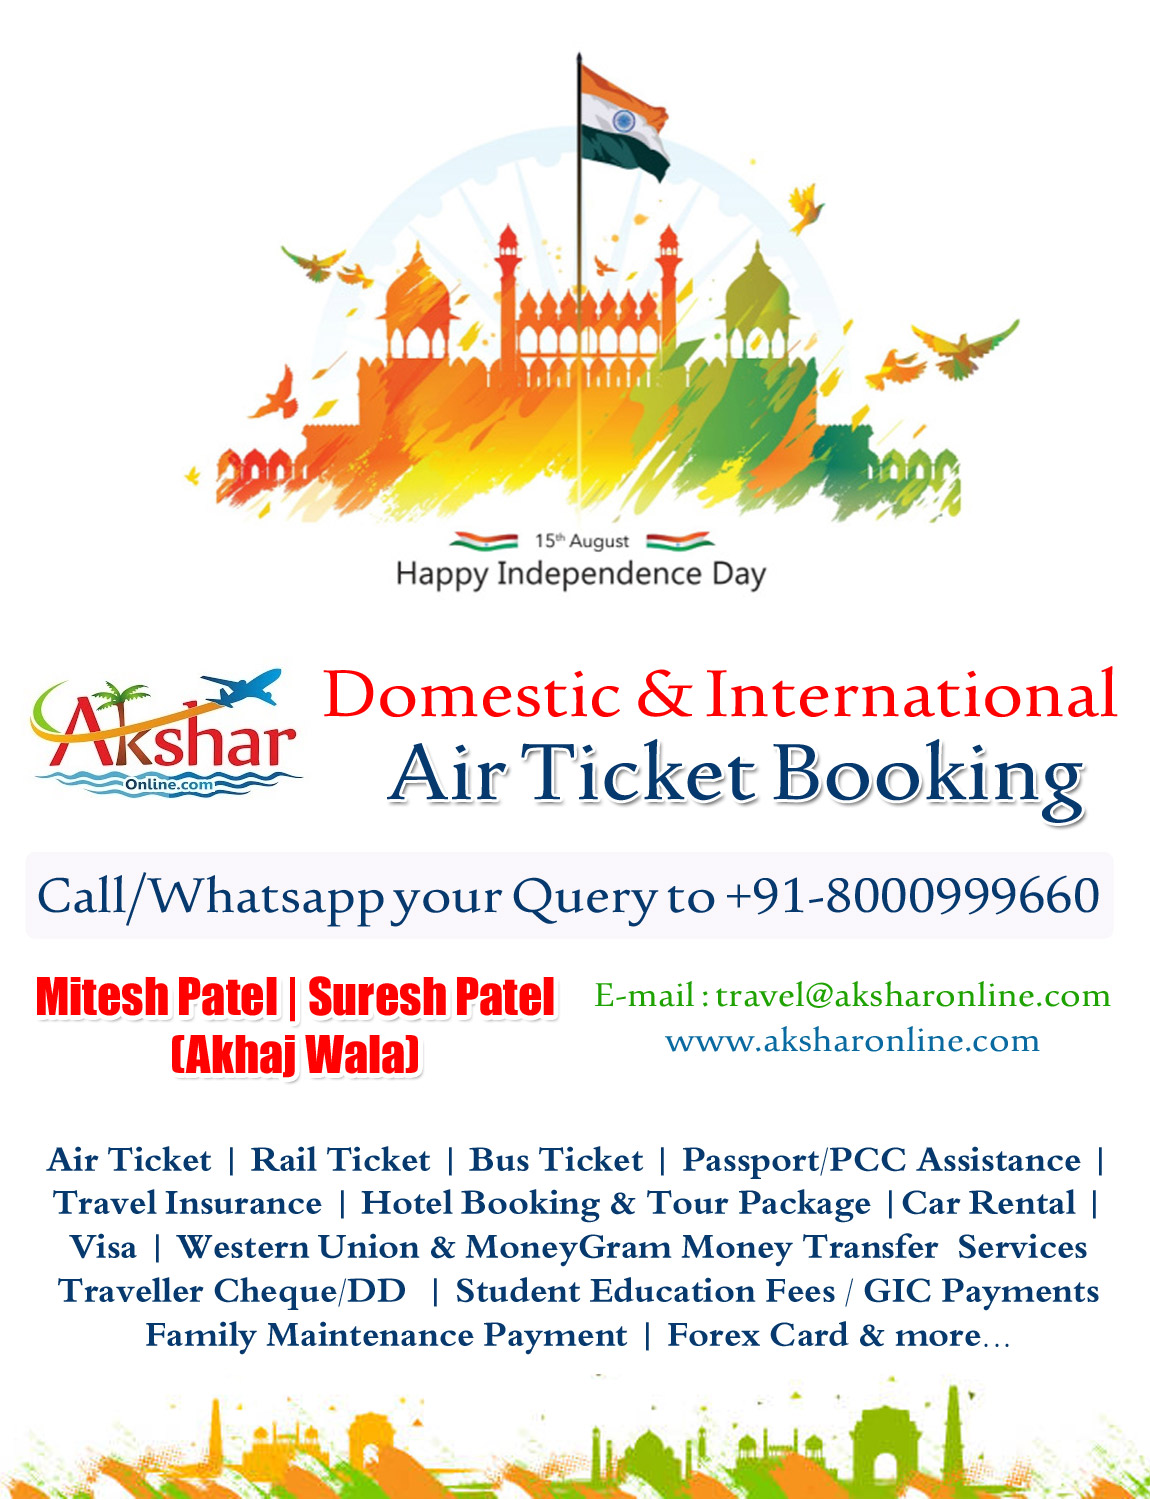 Domestic and International Air Ticket | Rail Ticket | Bus Ticket | Passport/PCC Assistance | Travel Insurance | Hotel Booking & Tour Package |Car Rental | Visa | Western Union & MoneyGram Money Transfer  Services Traveller Cheque/DD  | Student Education Fees / GIC Payments Family Maintenance Payment | Forex Card & more... www.aksharonline.com, Email : travel@aksharonline.com, Call/Whatsapp your Query to +91-8000999660